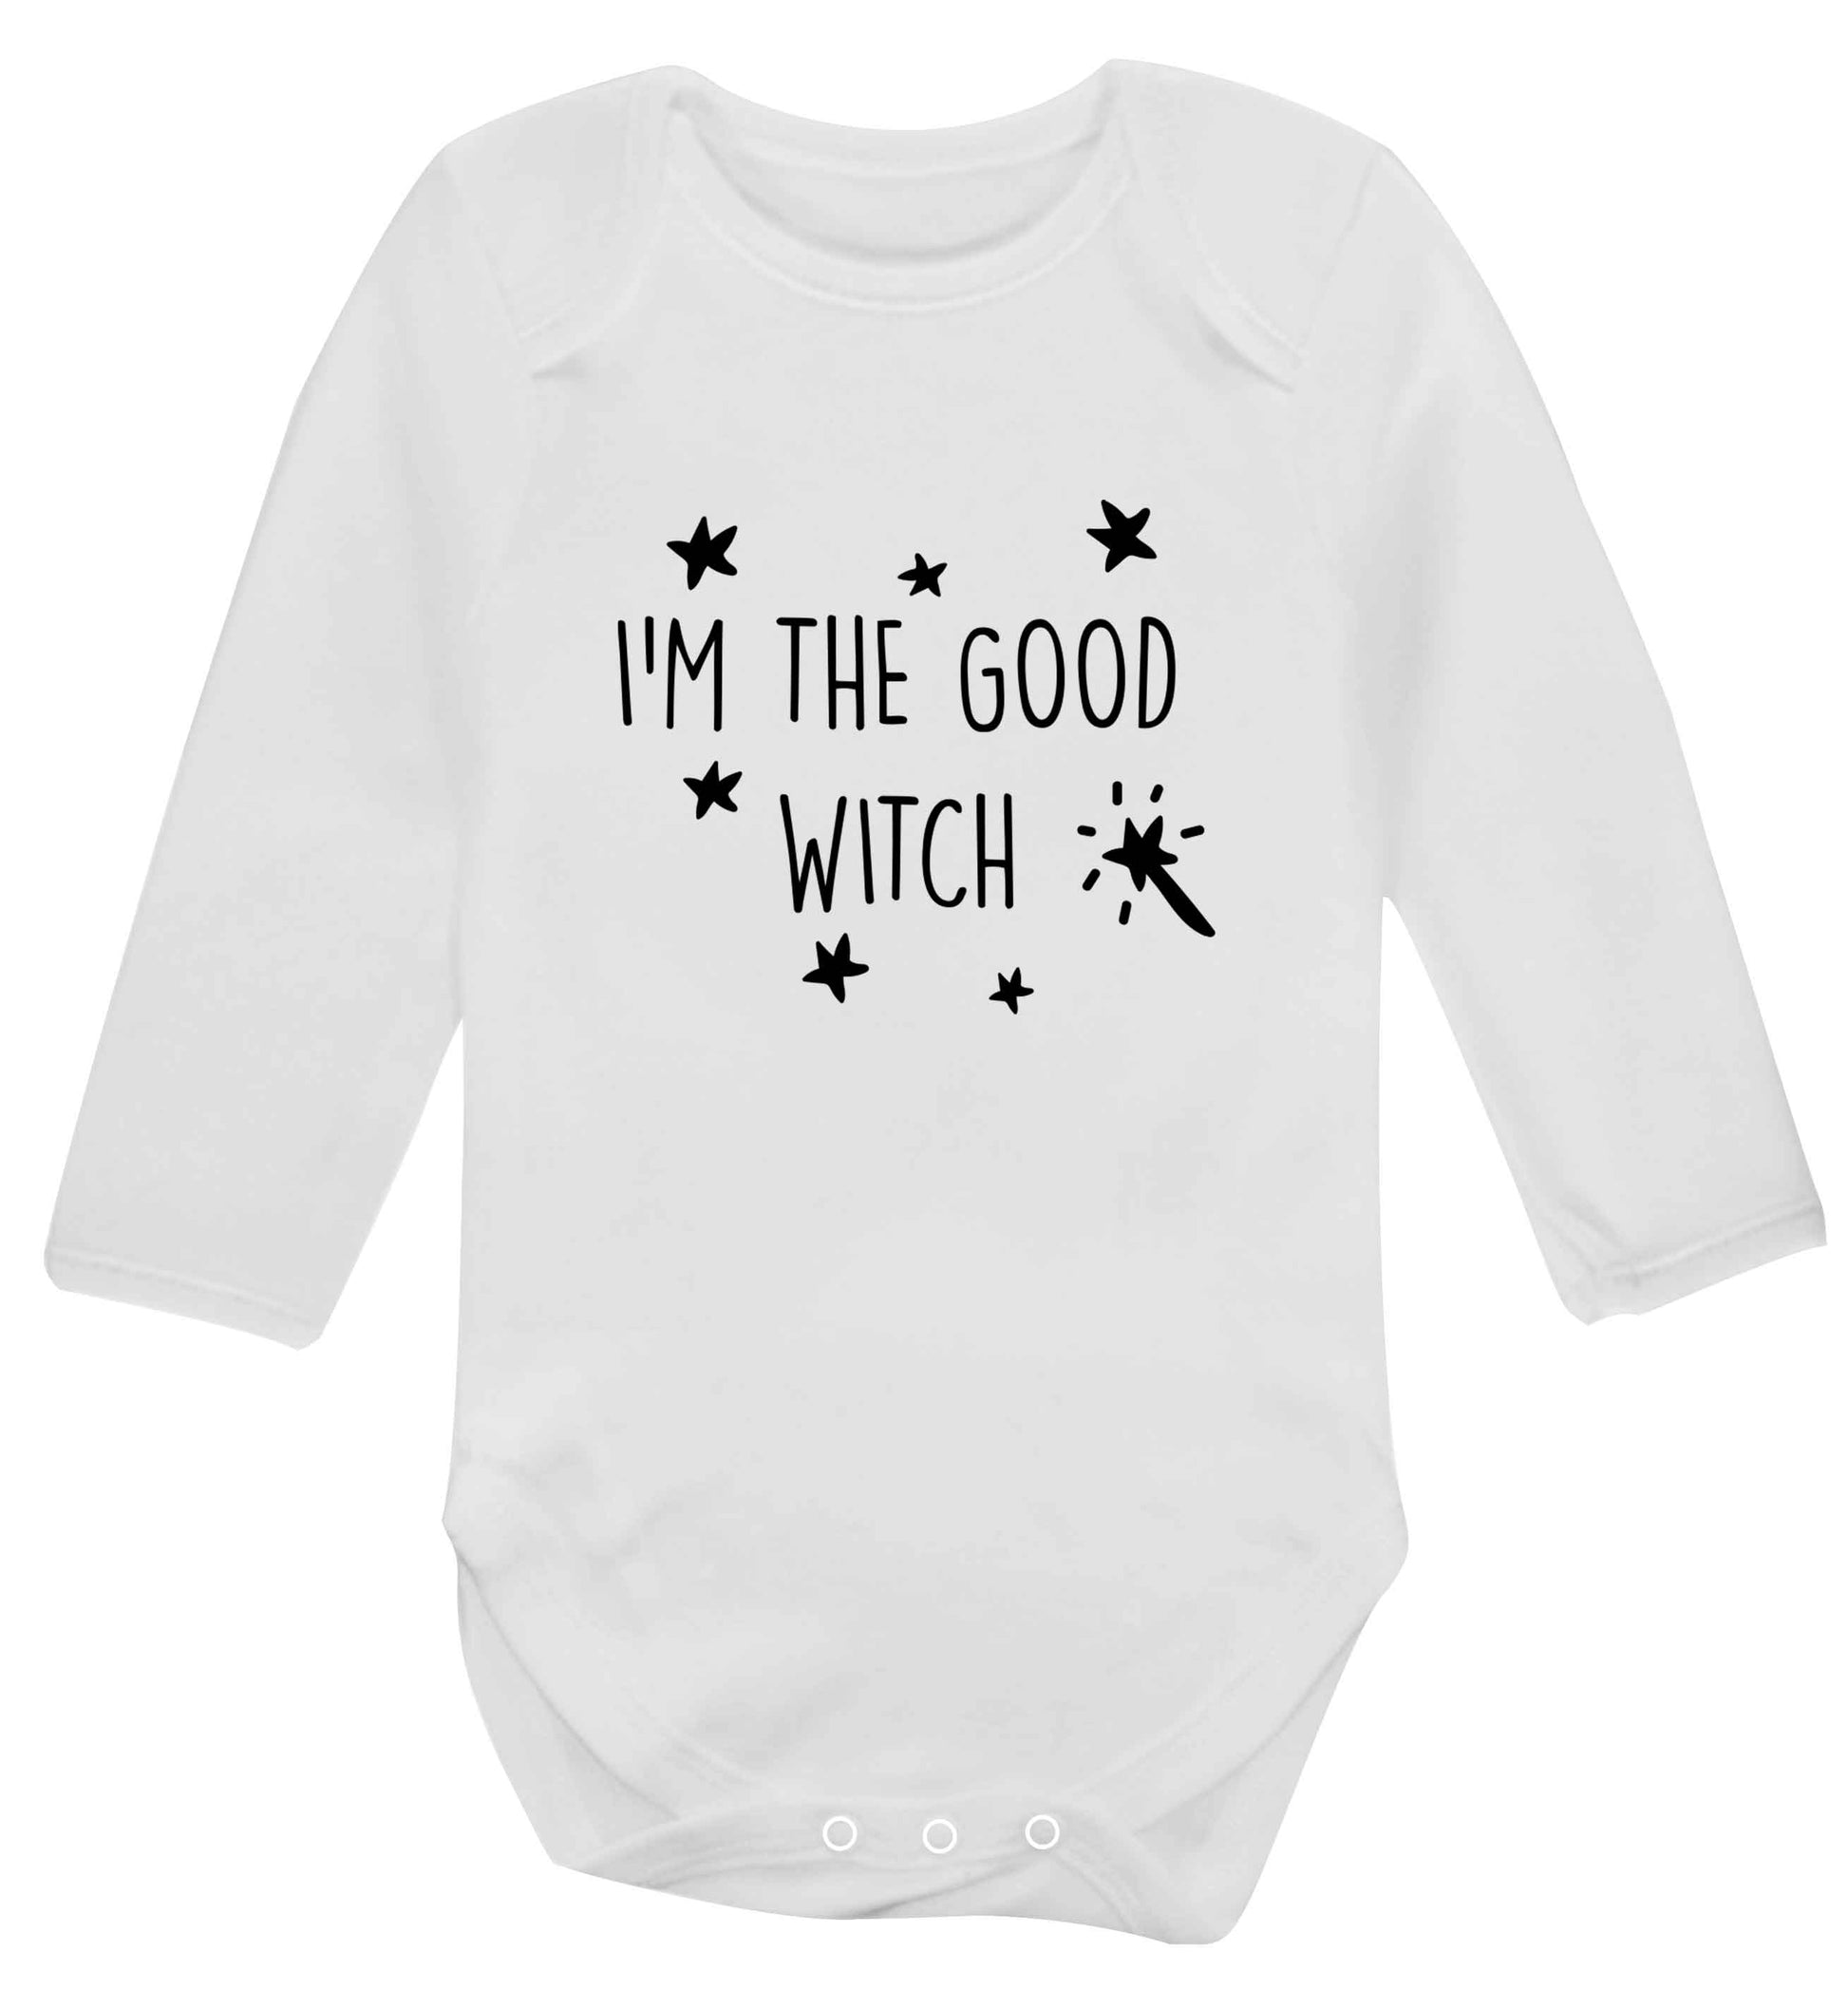 Good witch baby vest long sleeved white 6-12 months